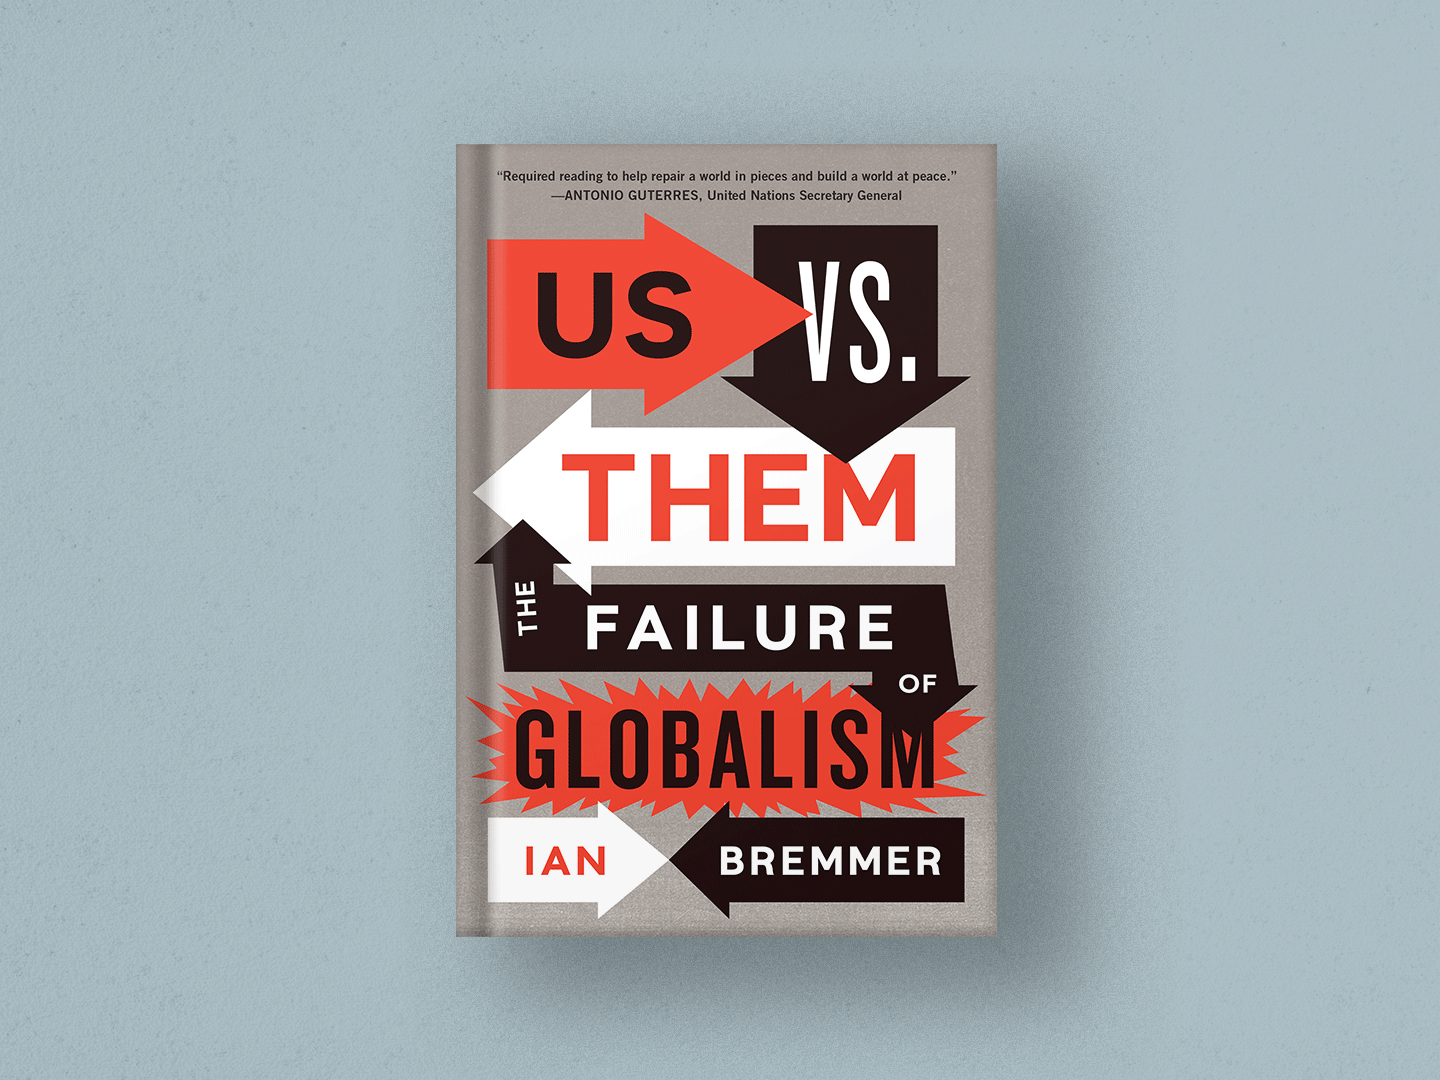 Ian Bremmer's book US vs Them The Failure of Globalism